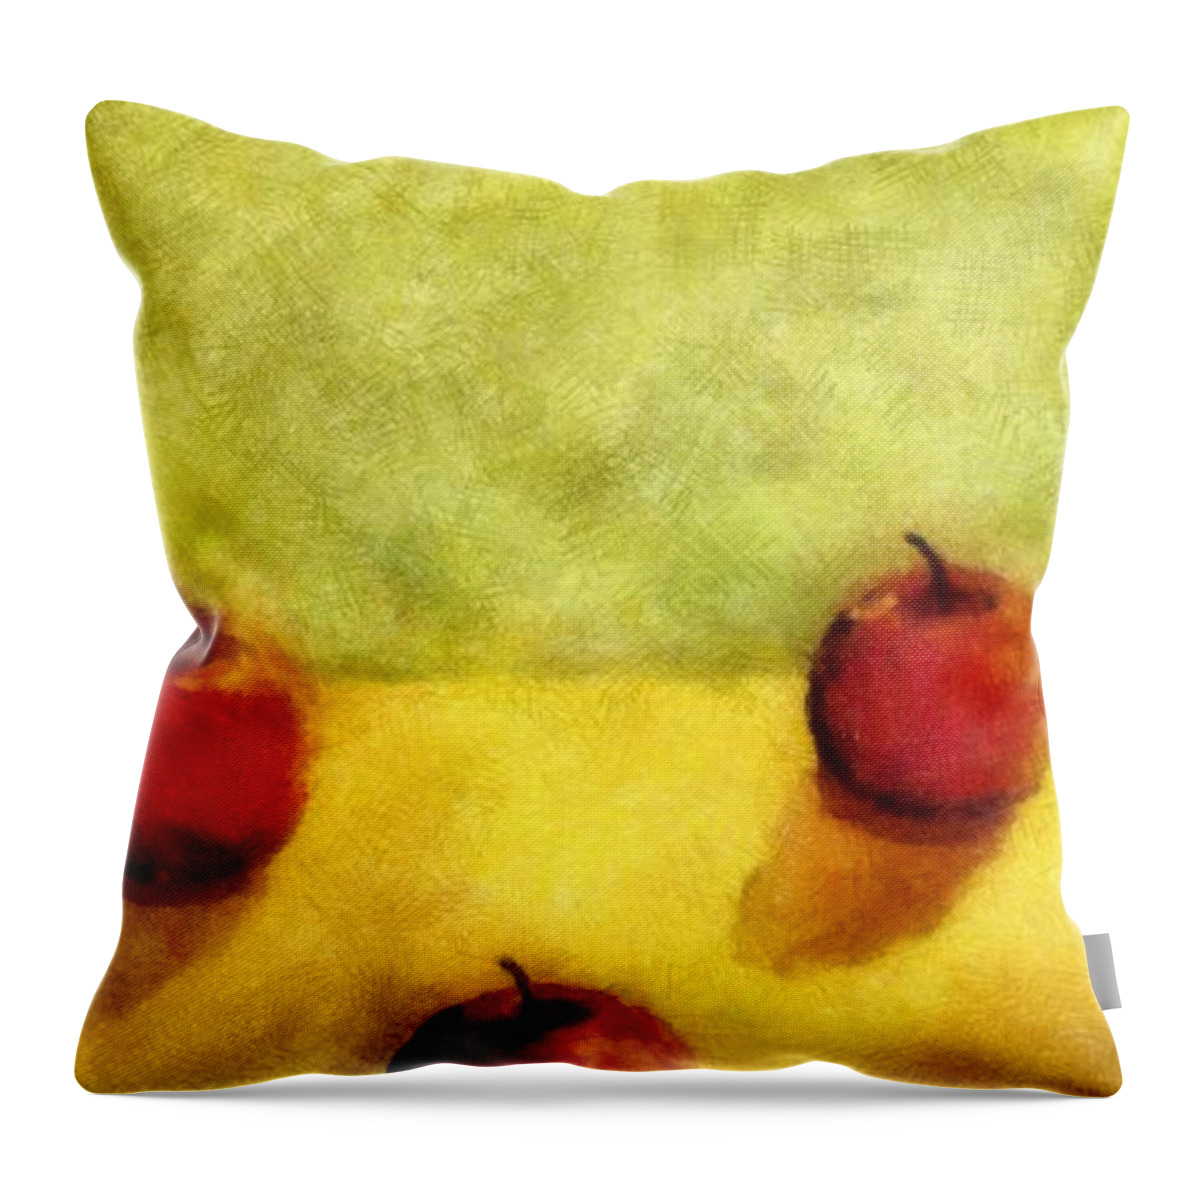 Apple Throw Pillow featuring the painting Six Apples by Michelle Calkins